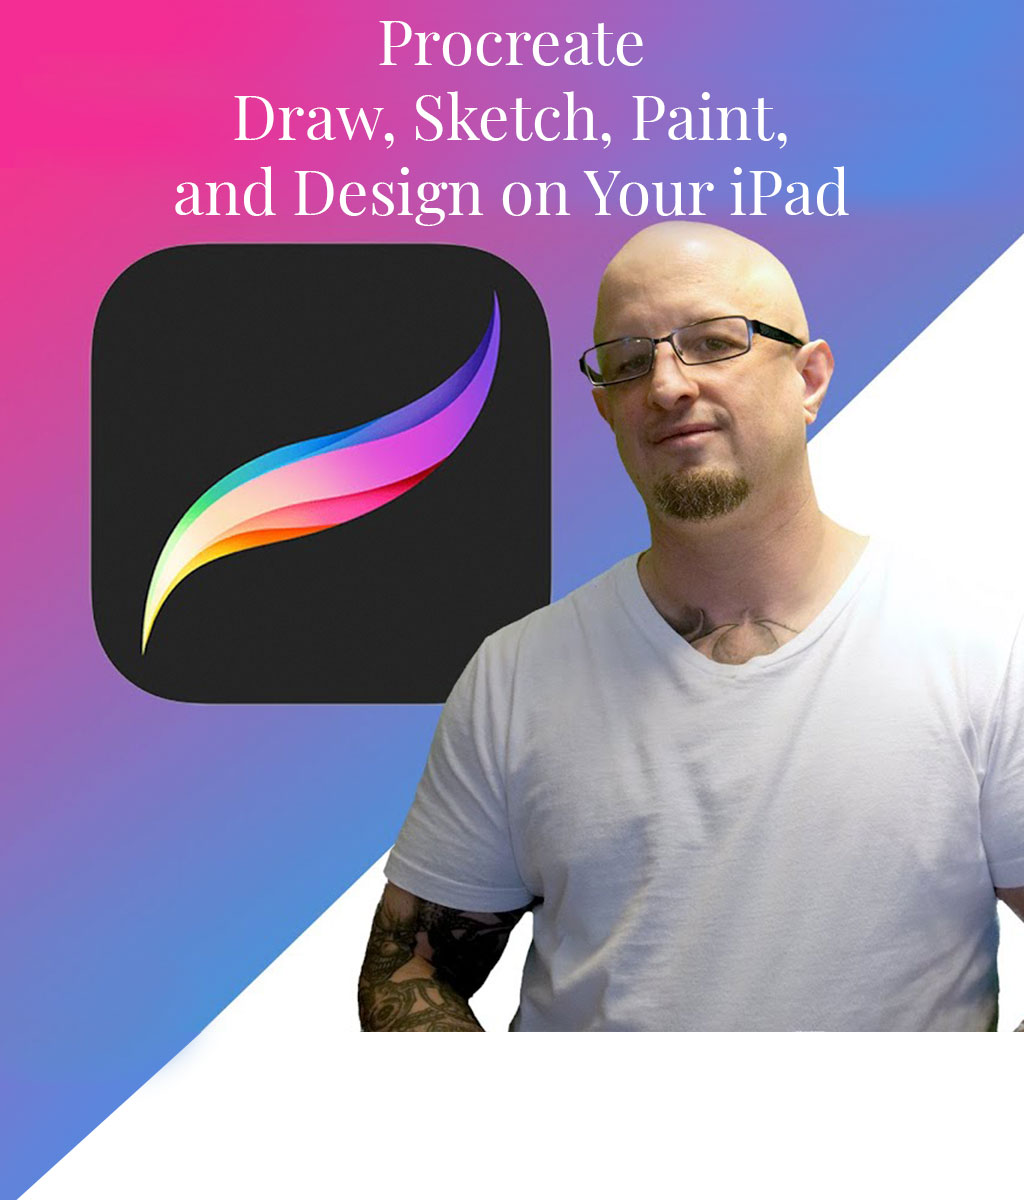 Procreate: Draw, Sketch, Paint, and Design on Your iPad